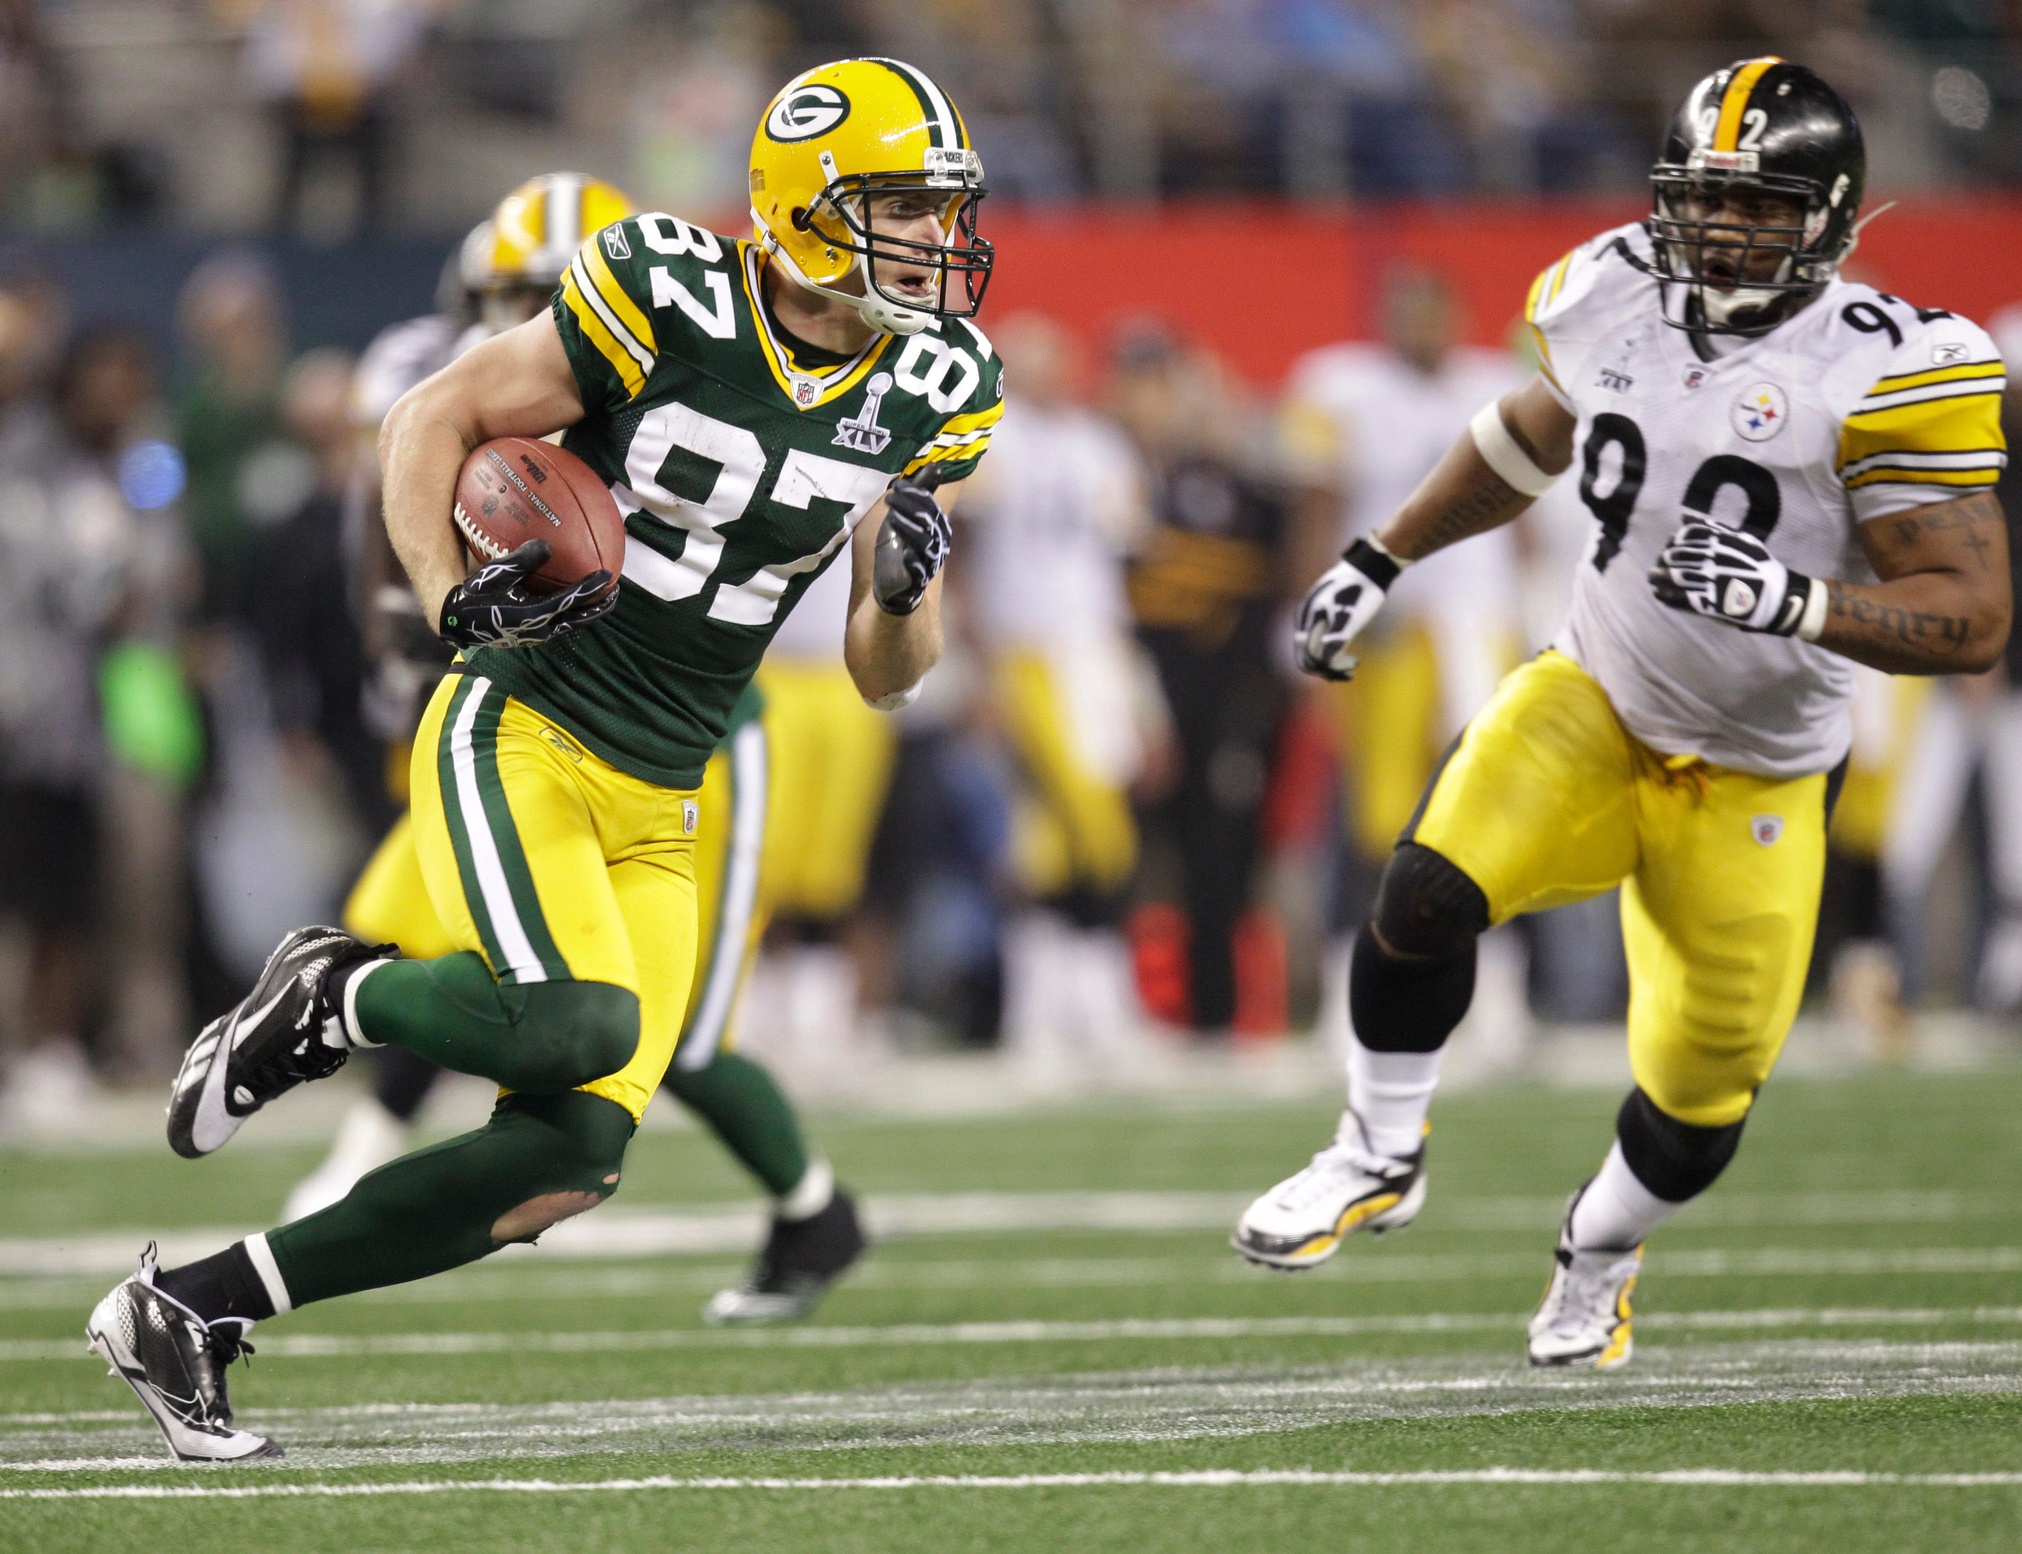 Green Bay Packers wide receiver Jordy Nelson